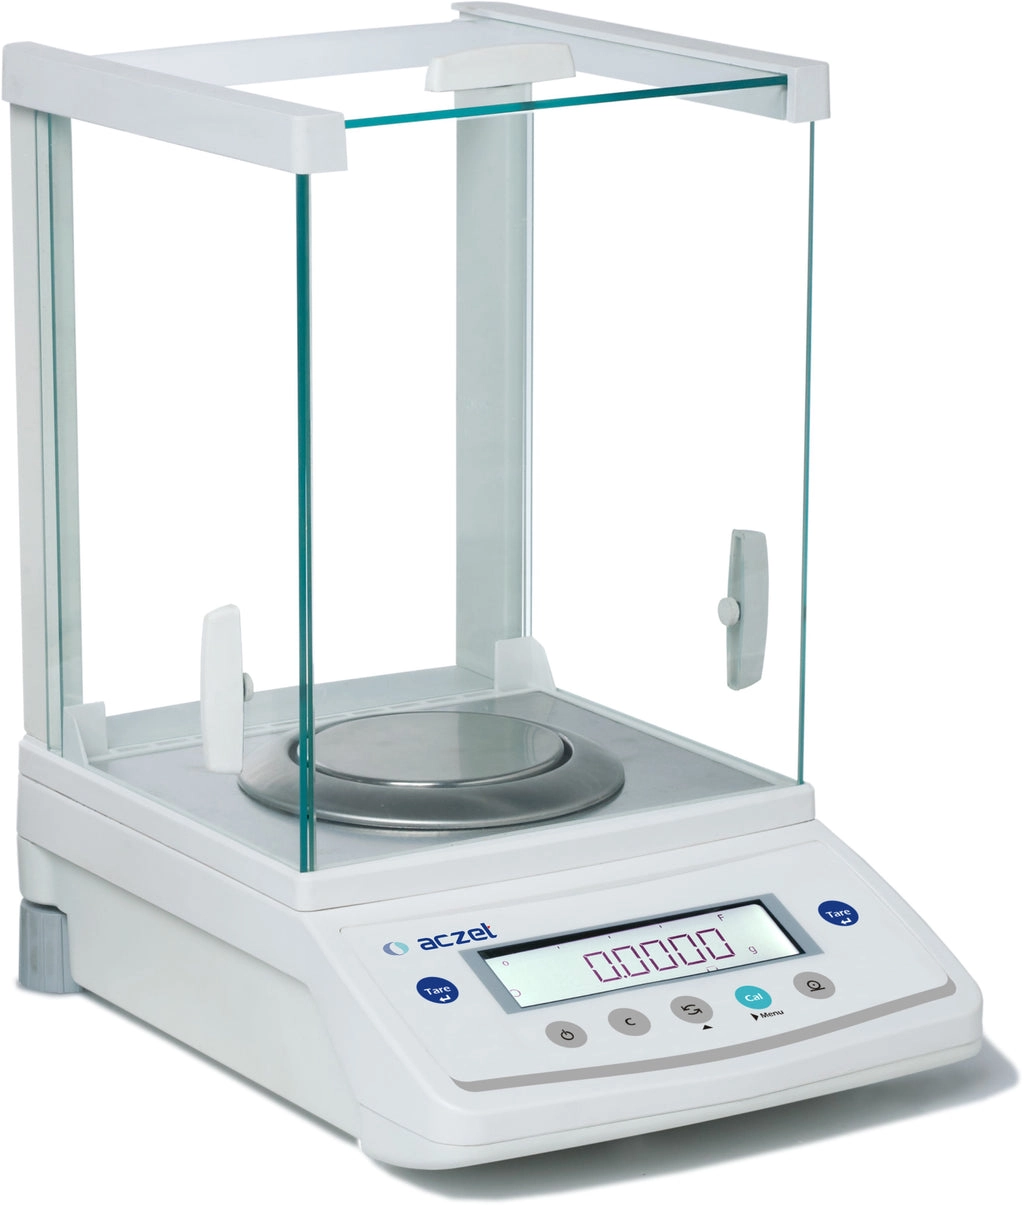 Aczet CY 224C Analytical Balance (220g x 0.1mg) with automatic internal calibration, LCD backlit display, GLP/GMP procedure